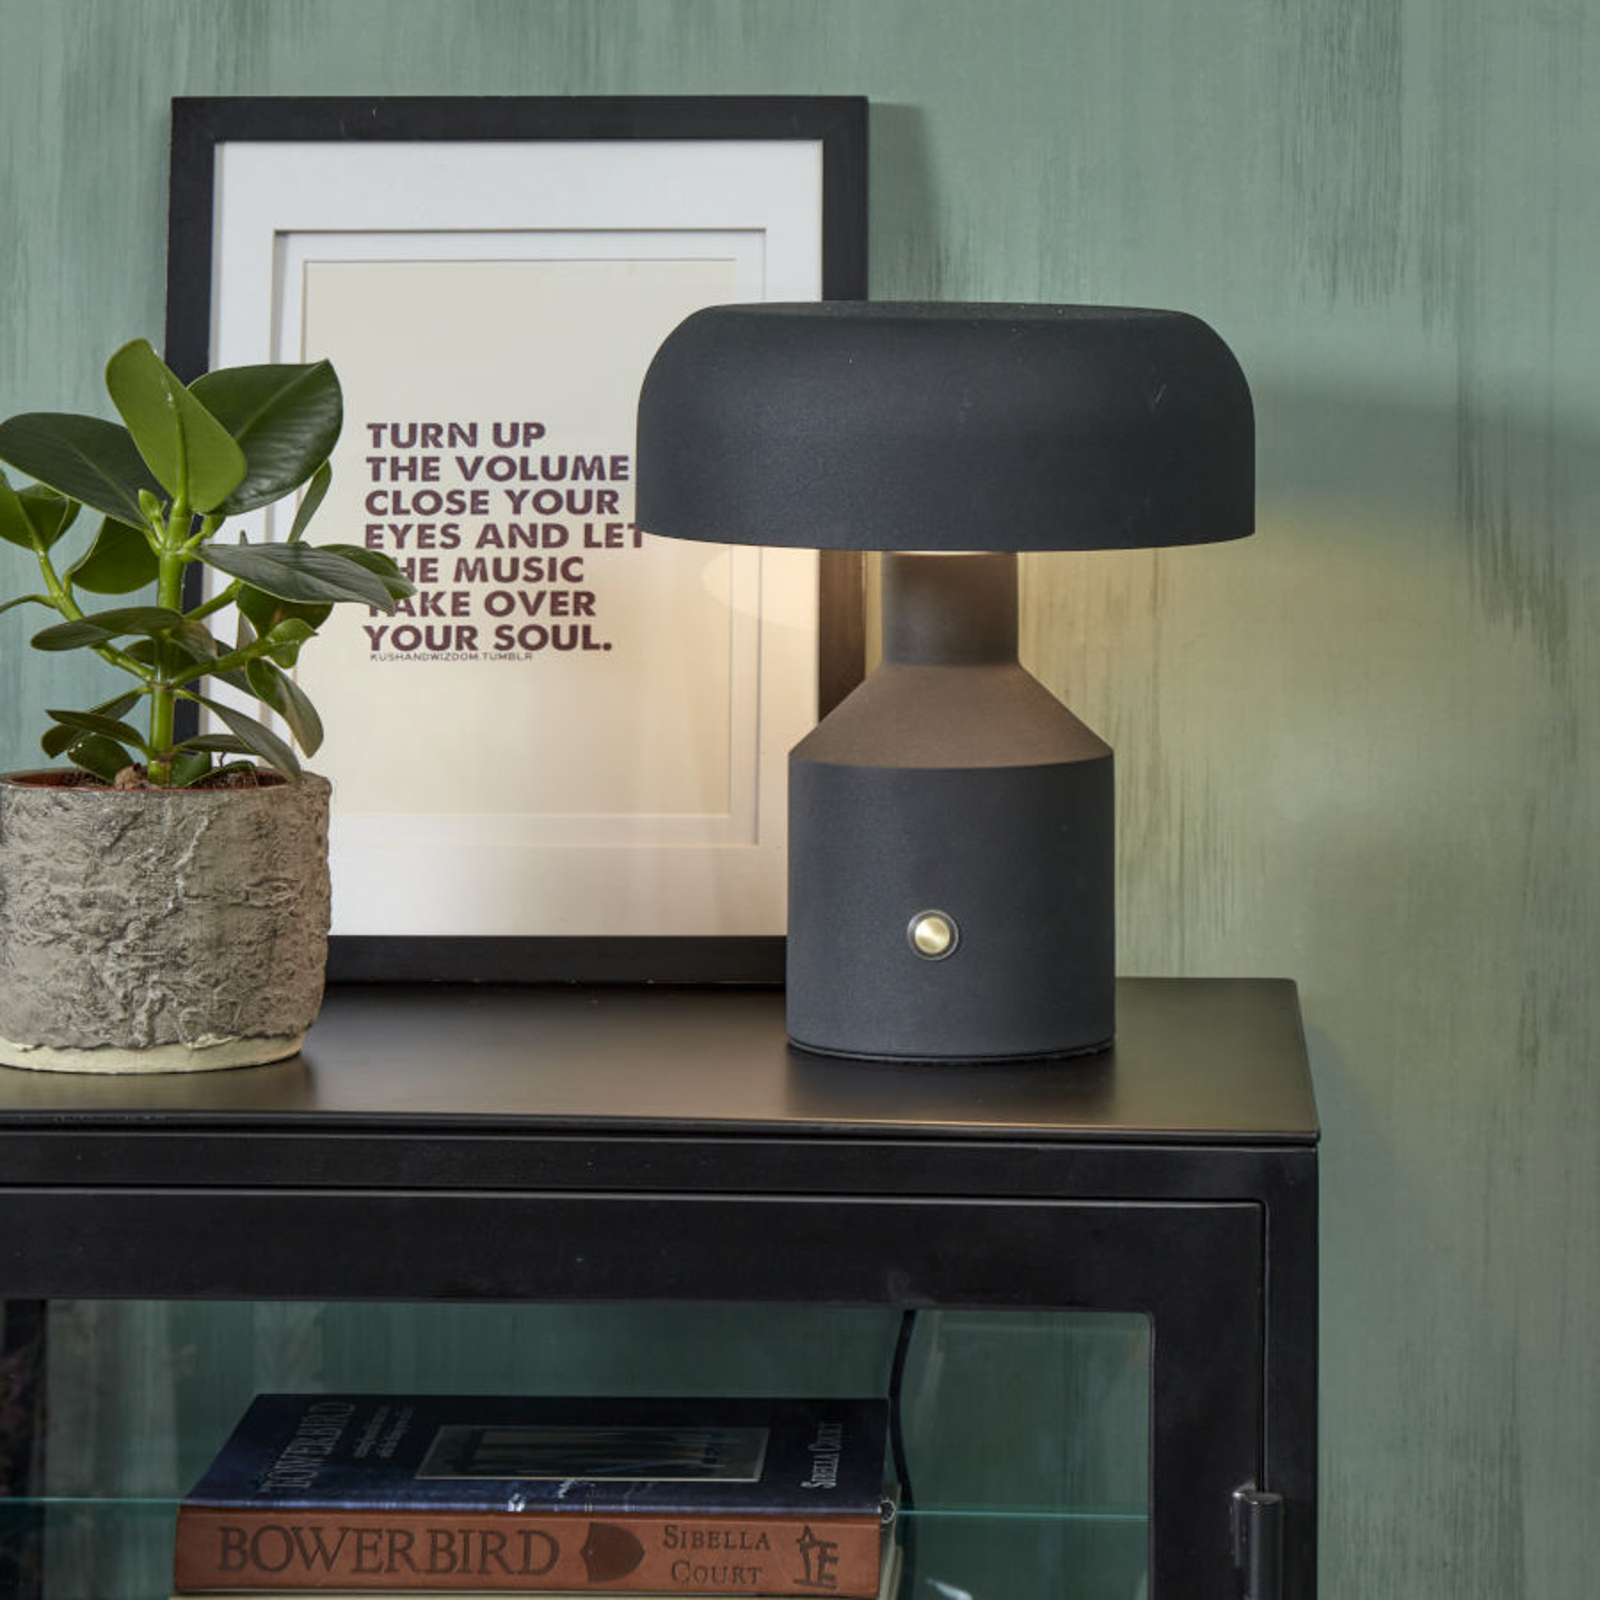 It’s about RoMi Porto table lamp, black